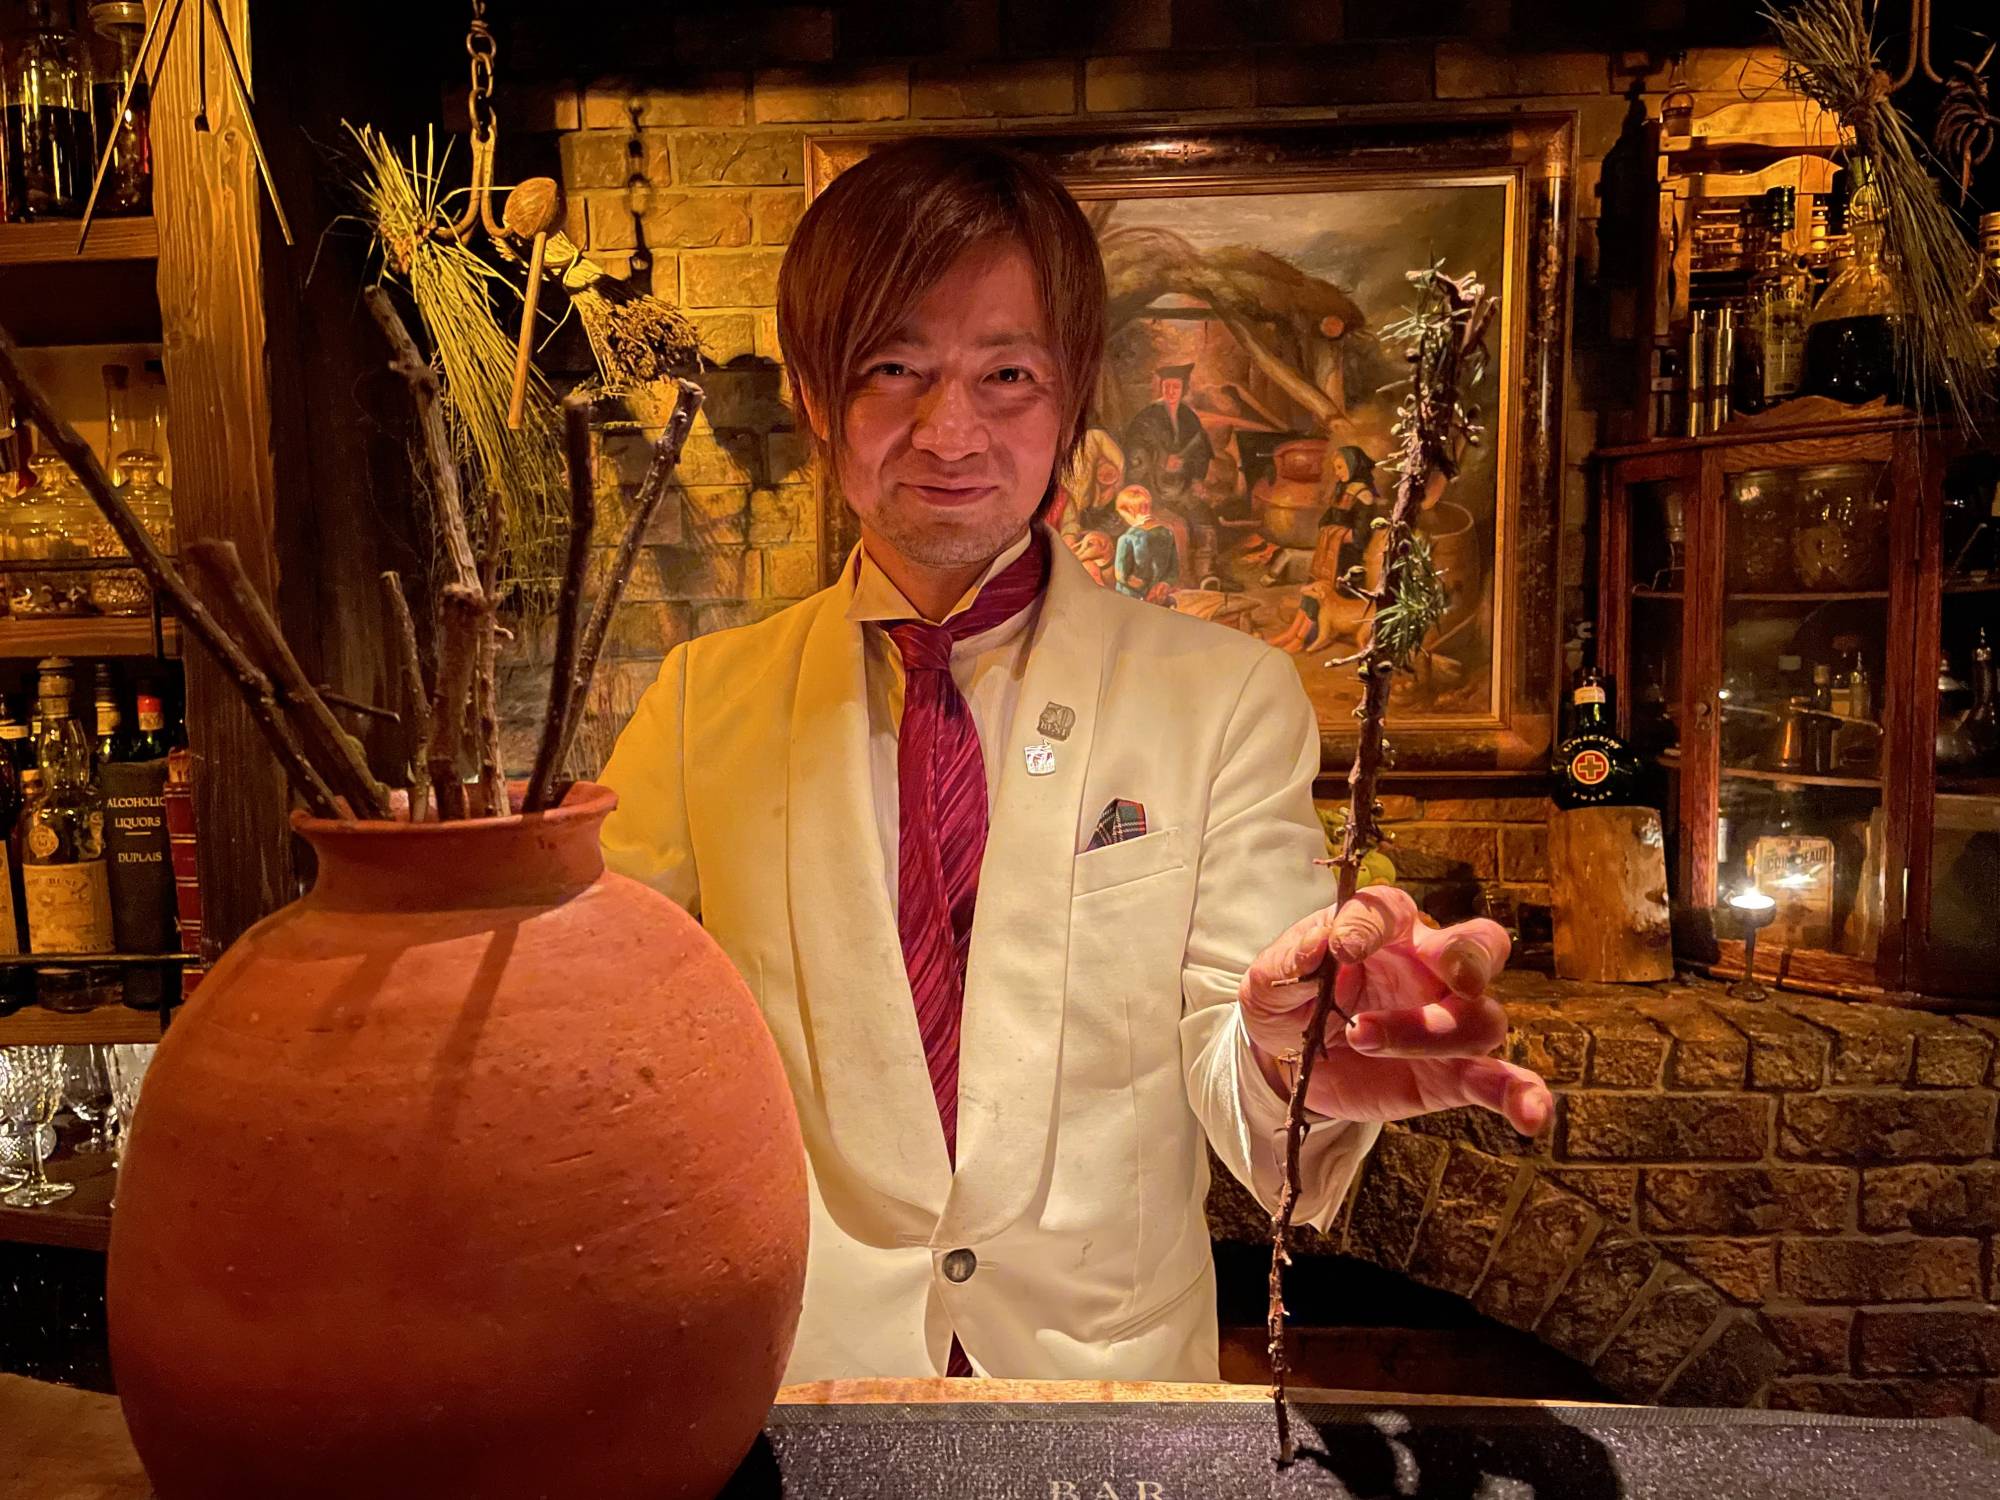 Bartender Hiroyasu Kayama is known for infusing home-grown herbs into his cocktails at the bar Ben Fiddich in Shinjuku, Tokyo.  | ALEX K.T. MARTIN